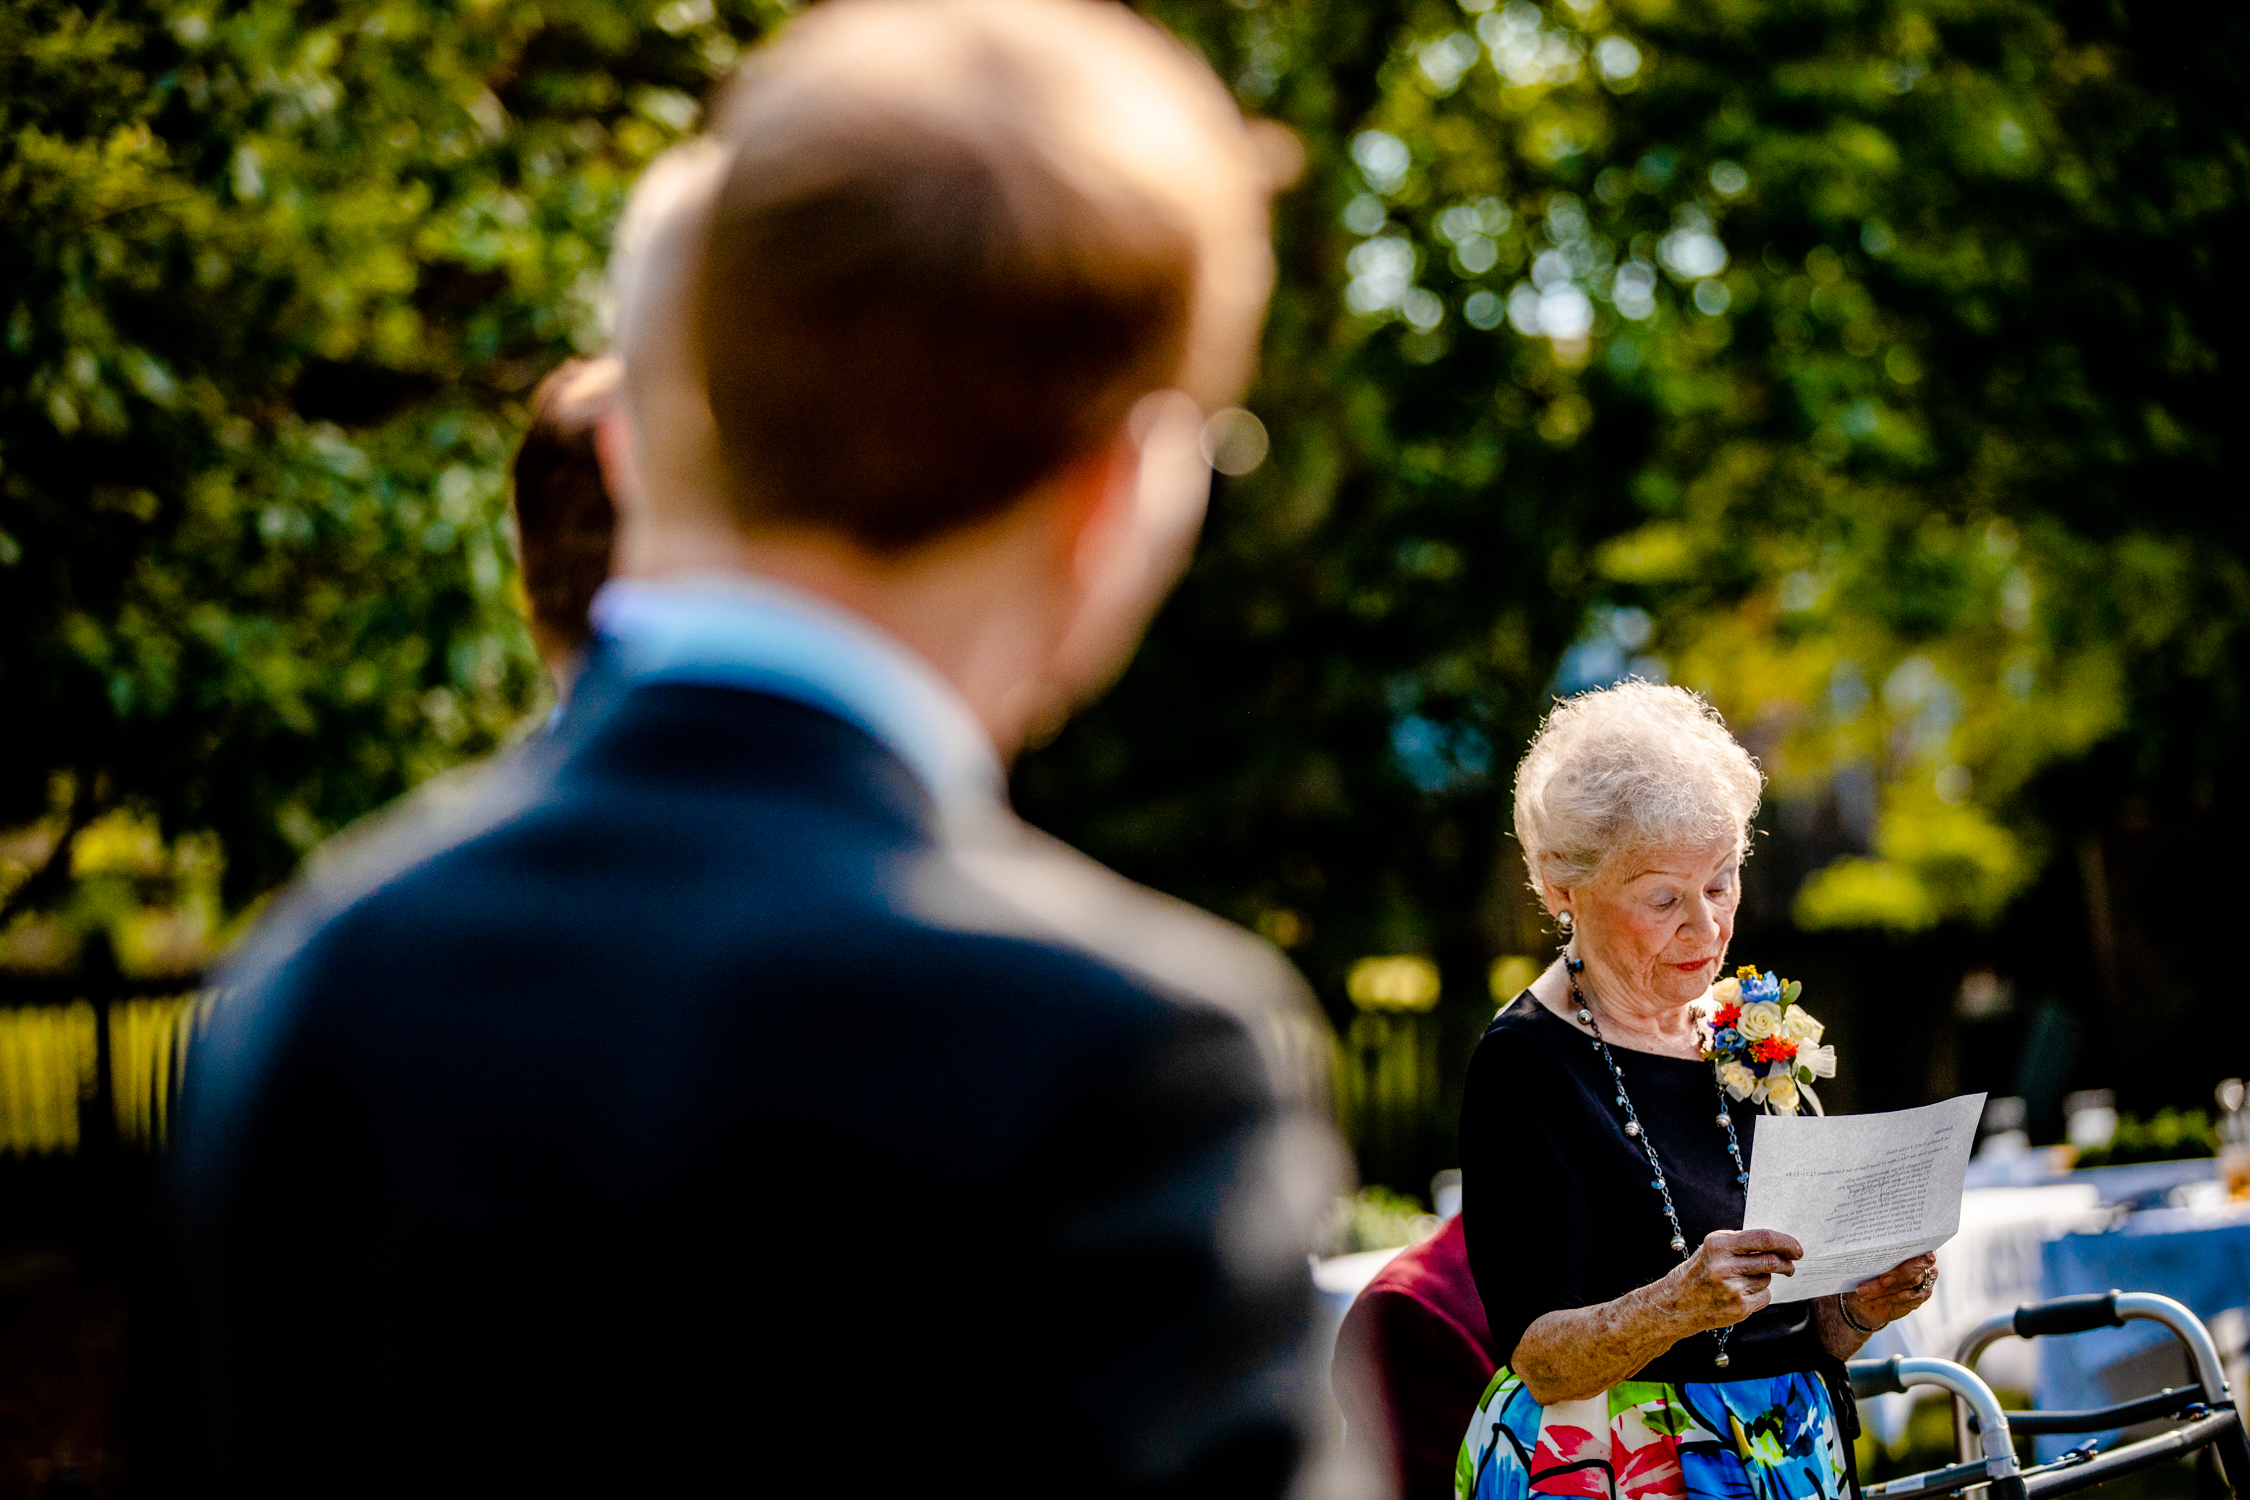 A grandmother gives a reading during a Naperville micro wedding.